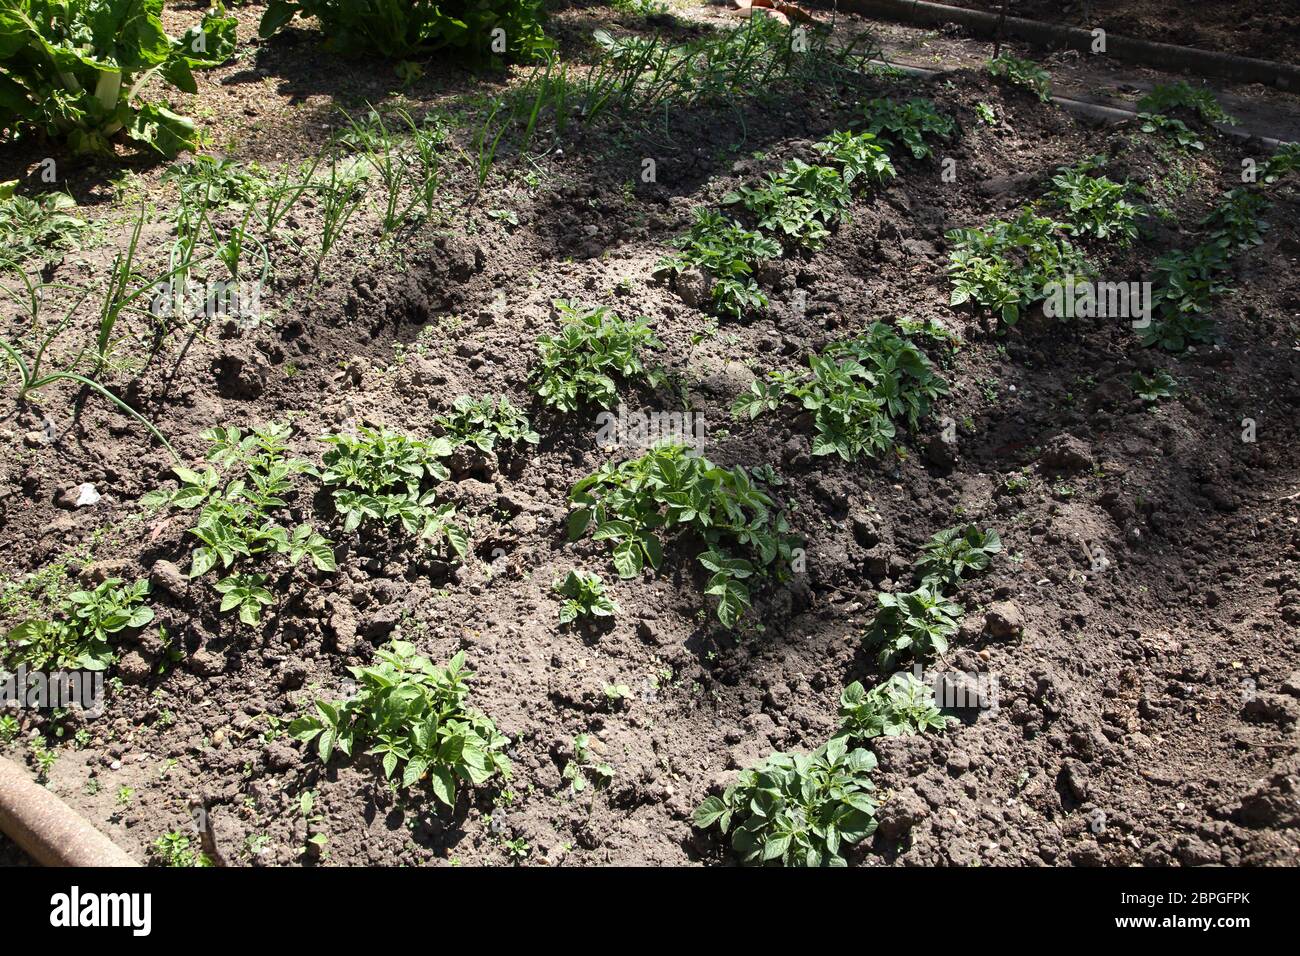 Potatoes growing in furrows with Onions in Garden, Surrey England Stock Photo